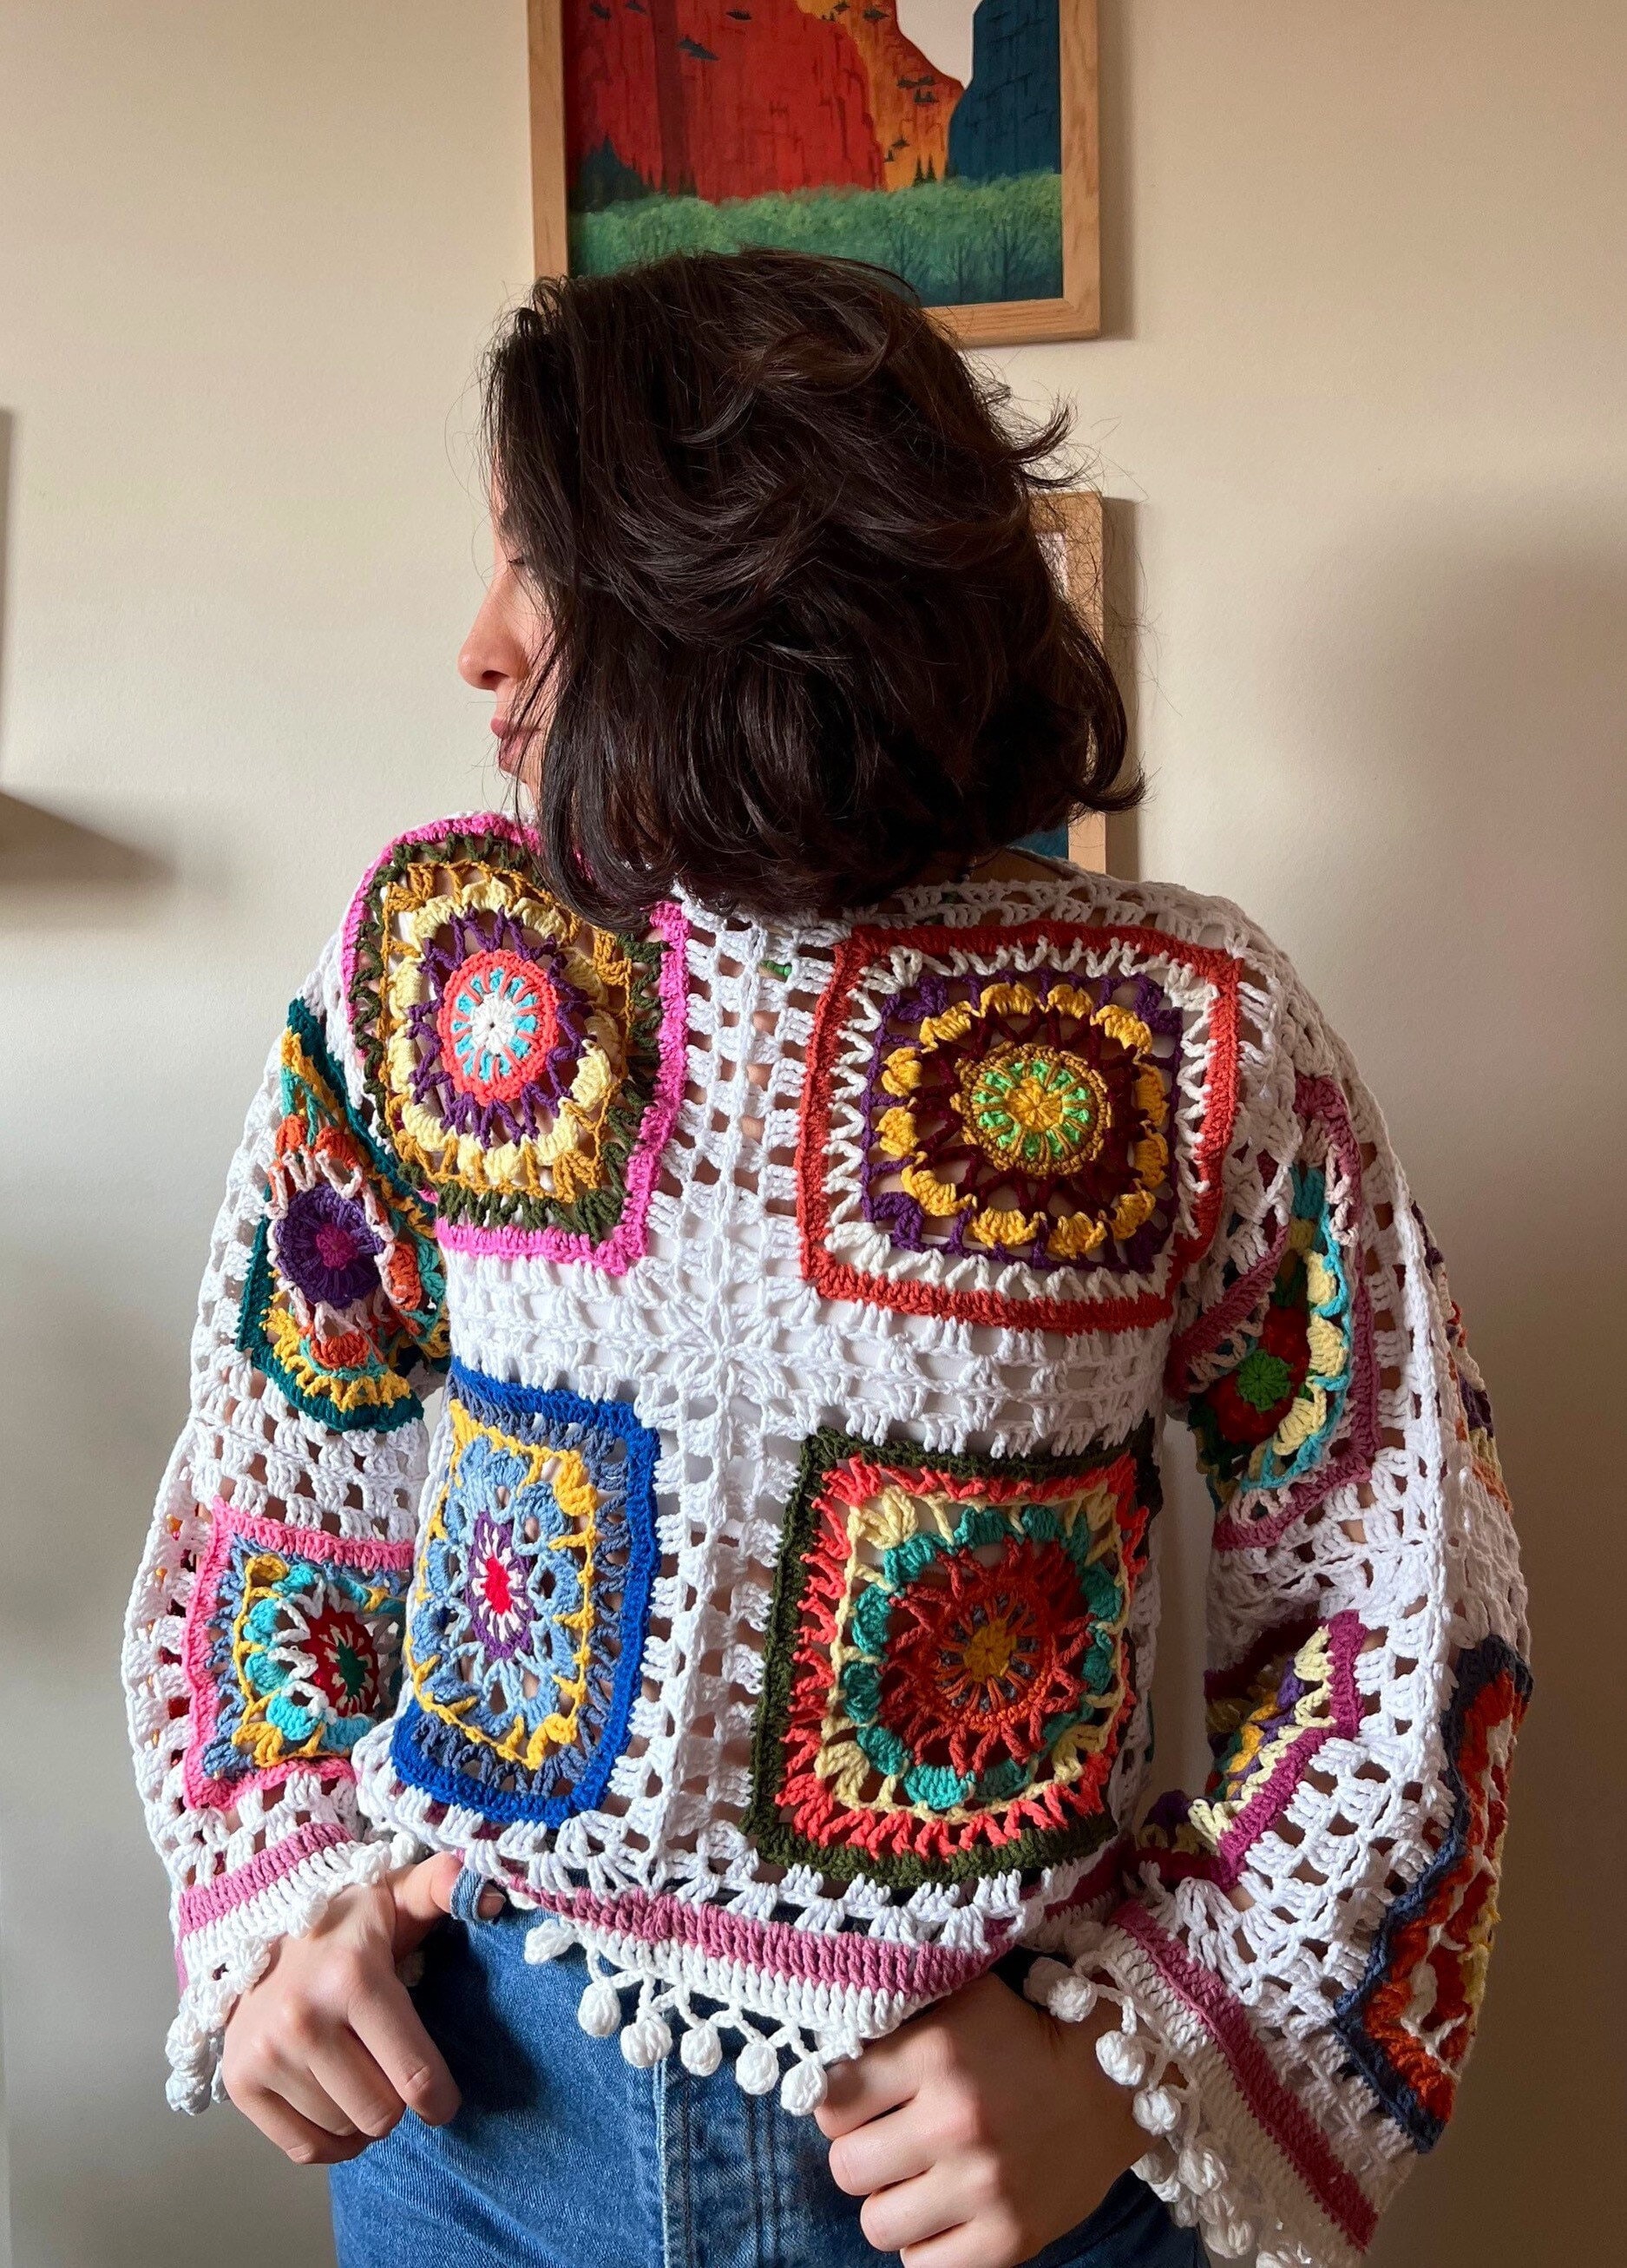 Granny Square Flair: book review and giveaway